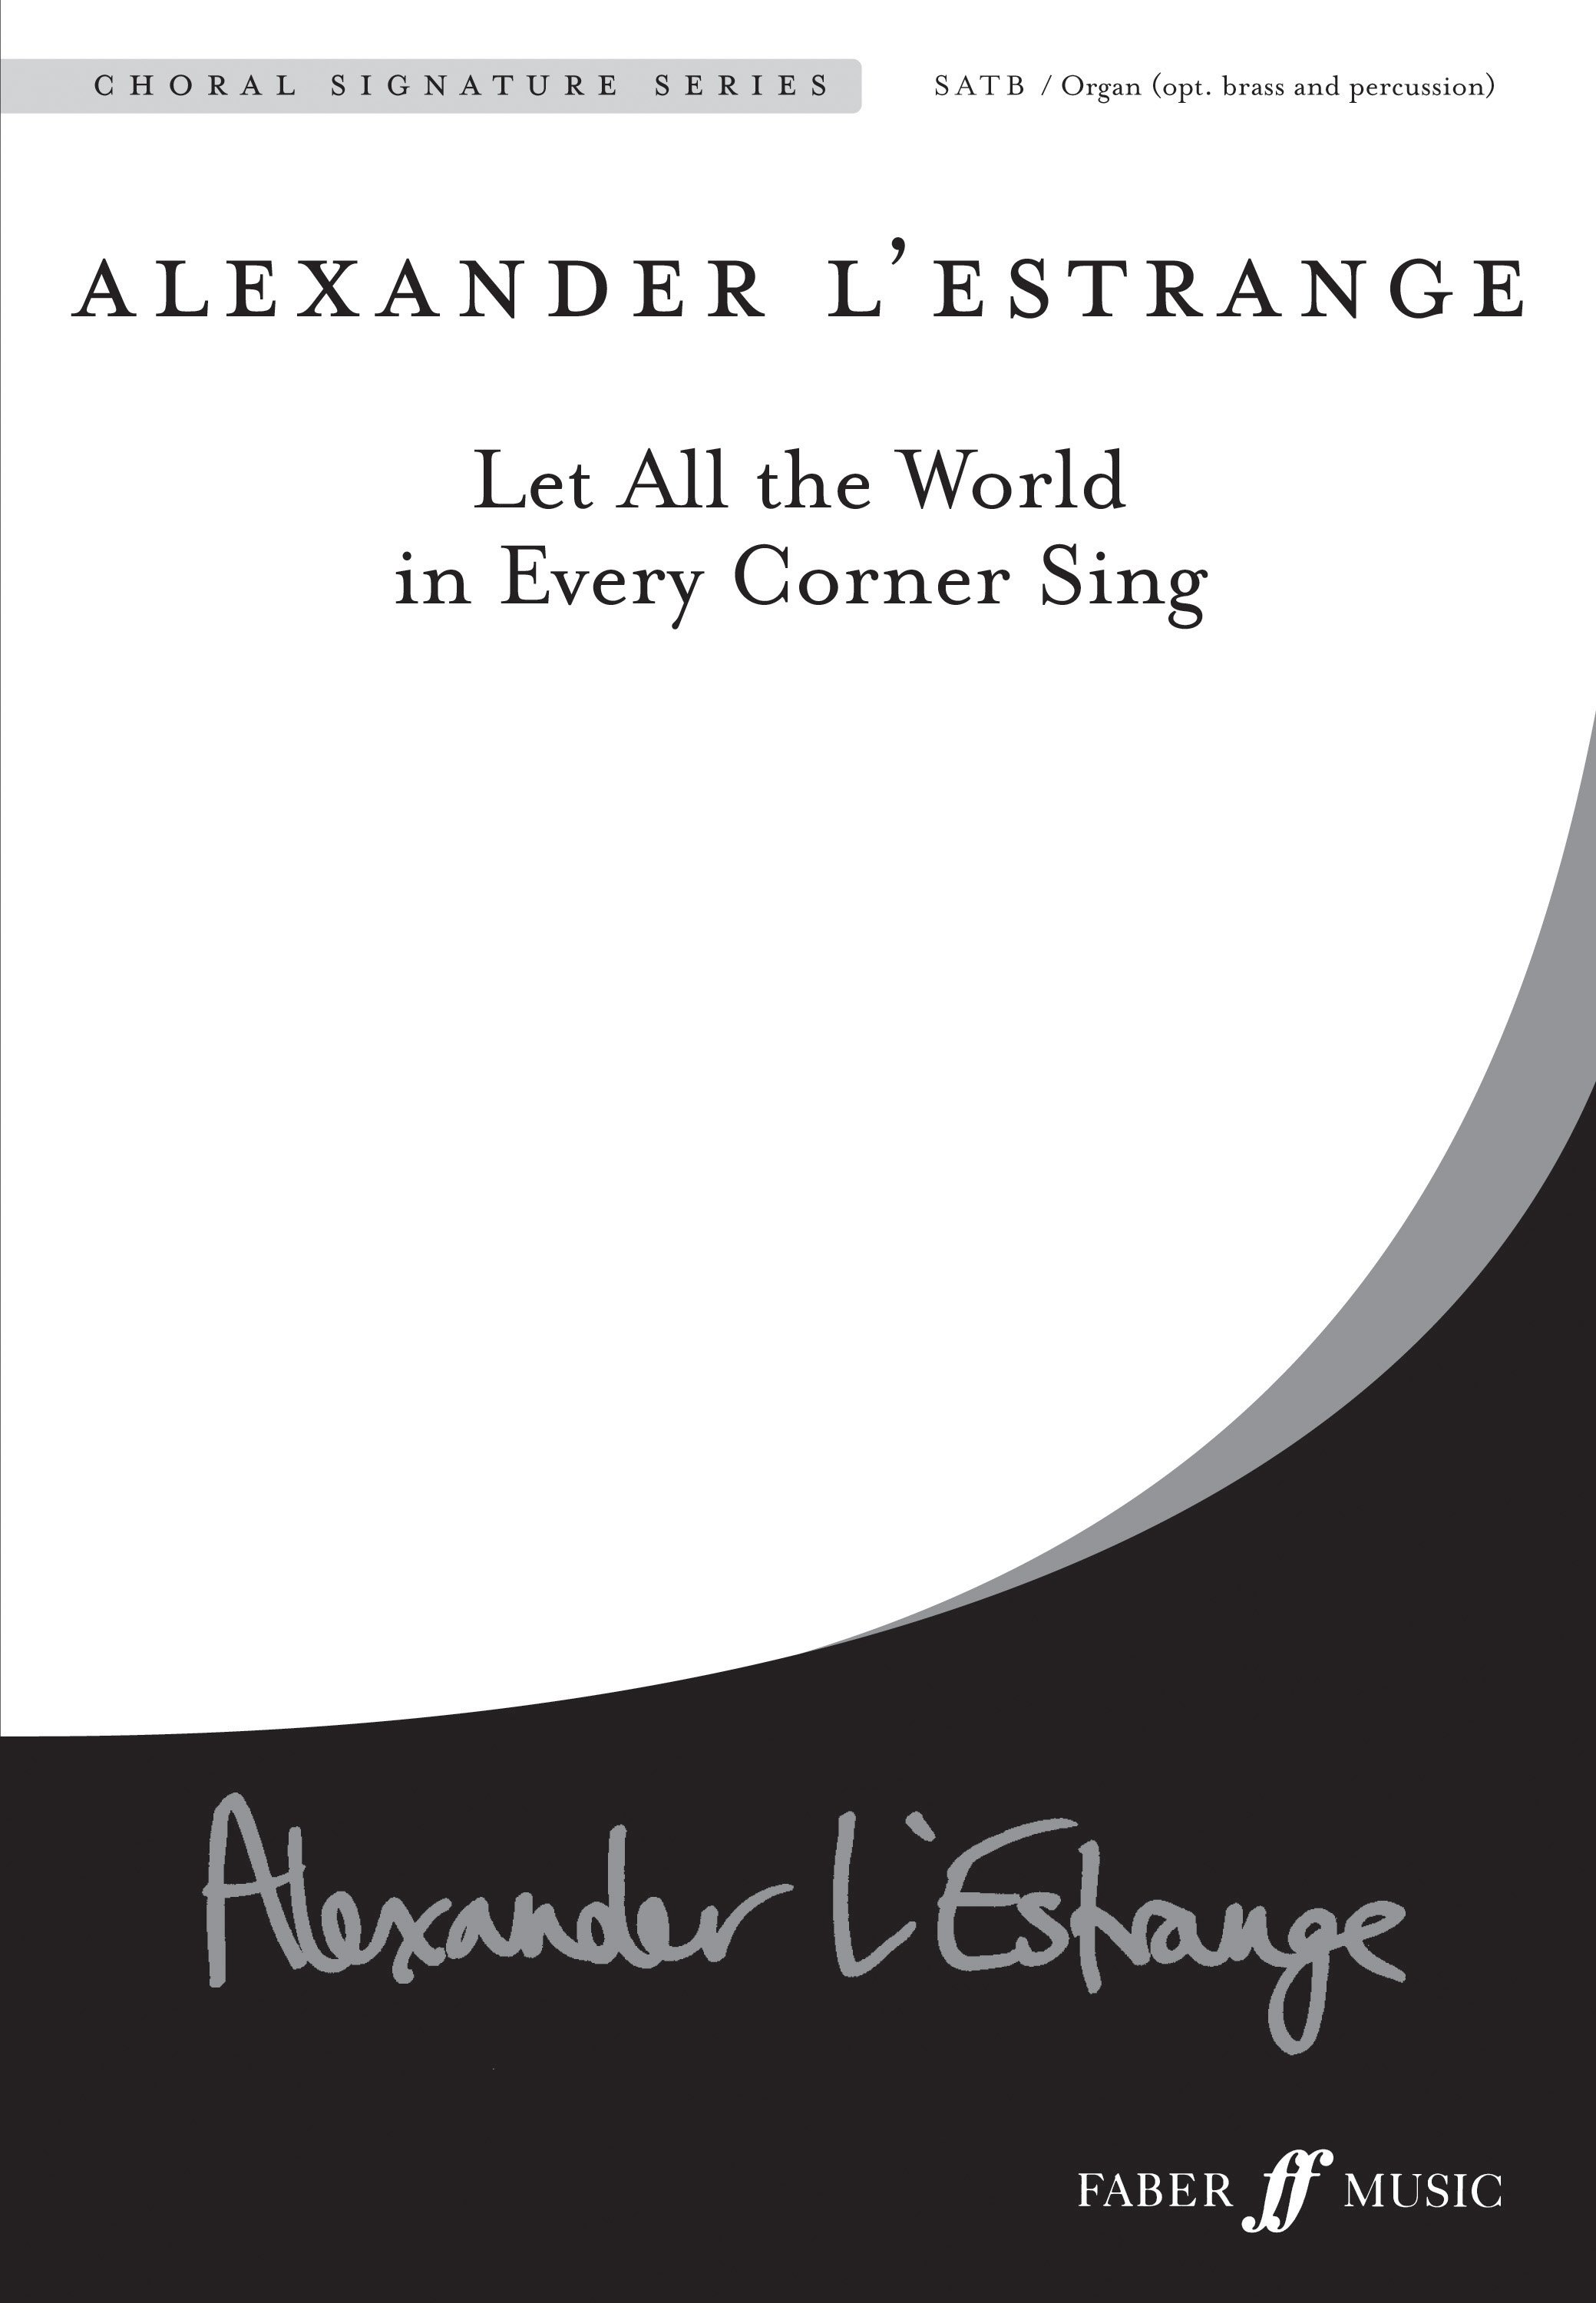 Let all the world in every corner sing OLD COVER.jpg